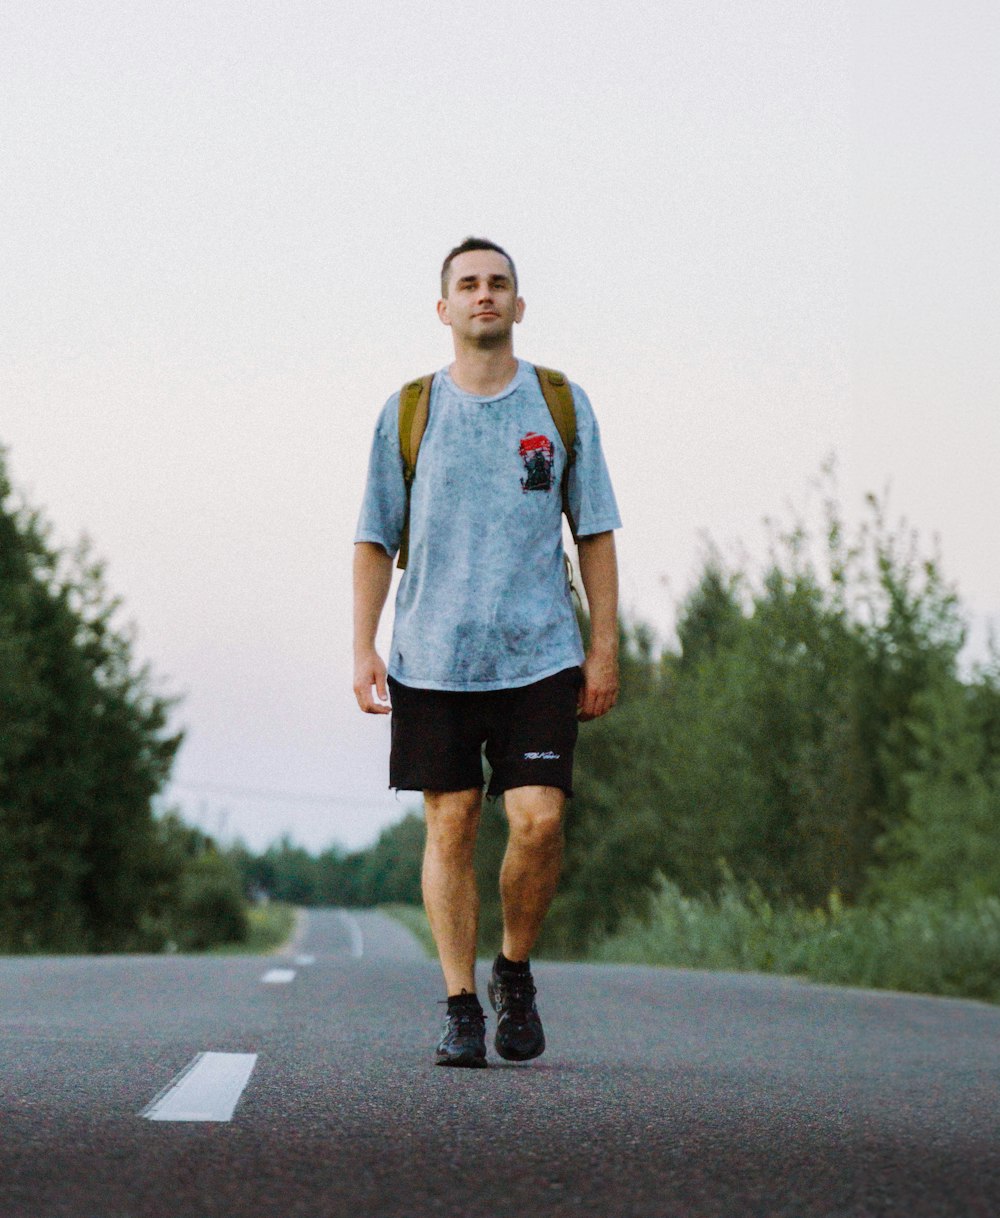 a man walking down a road with a backpack on